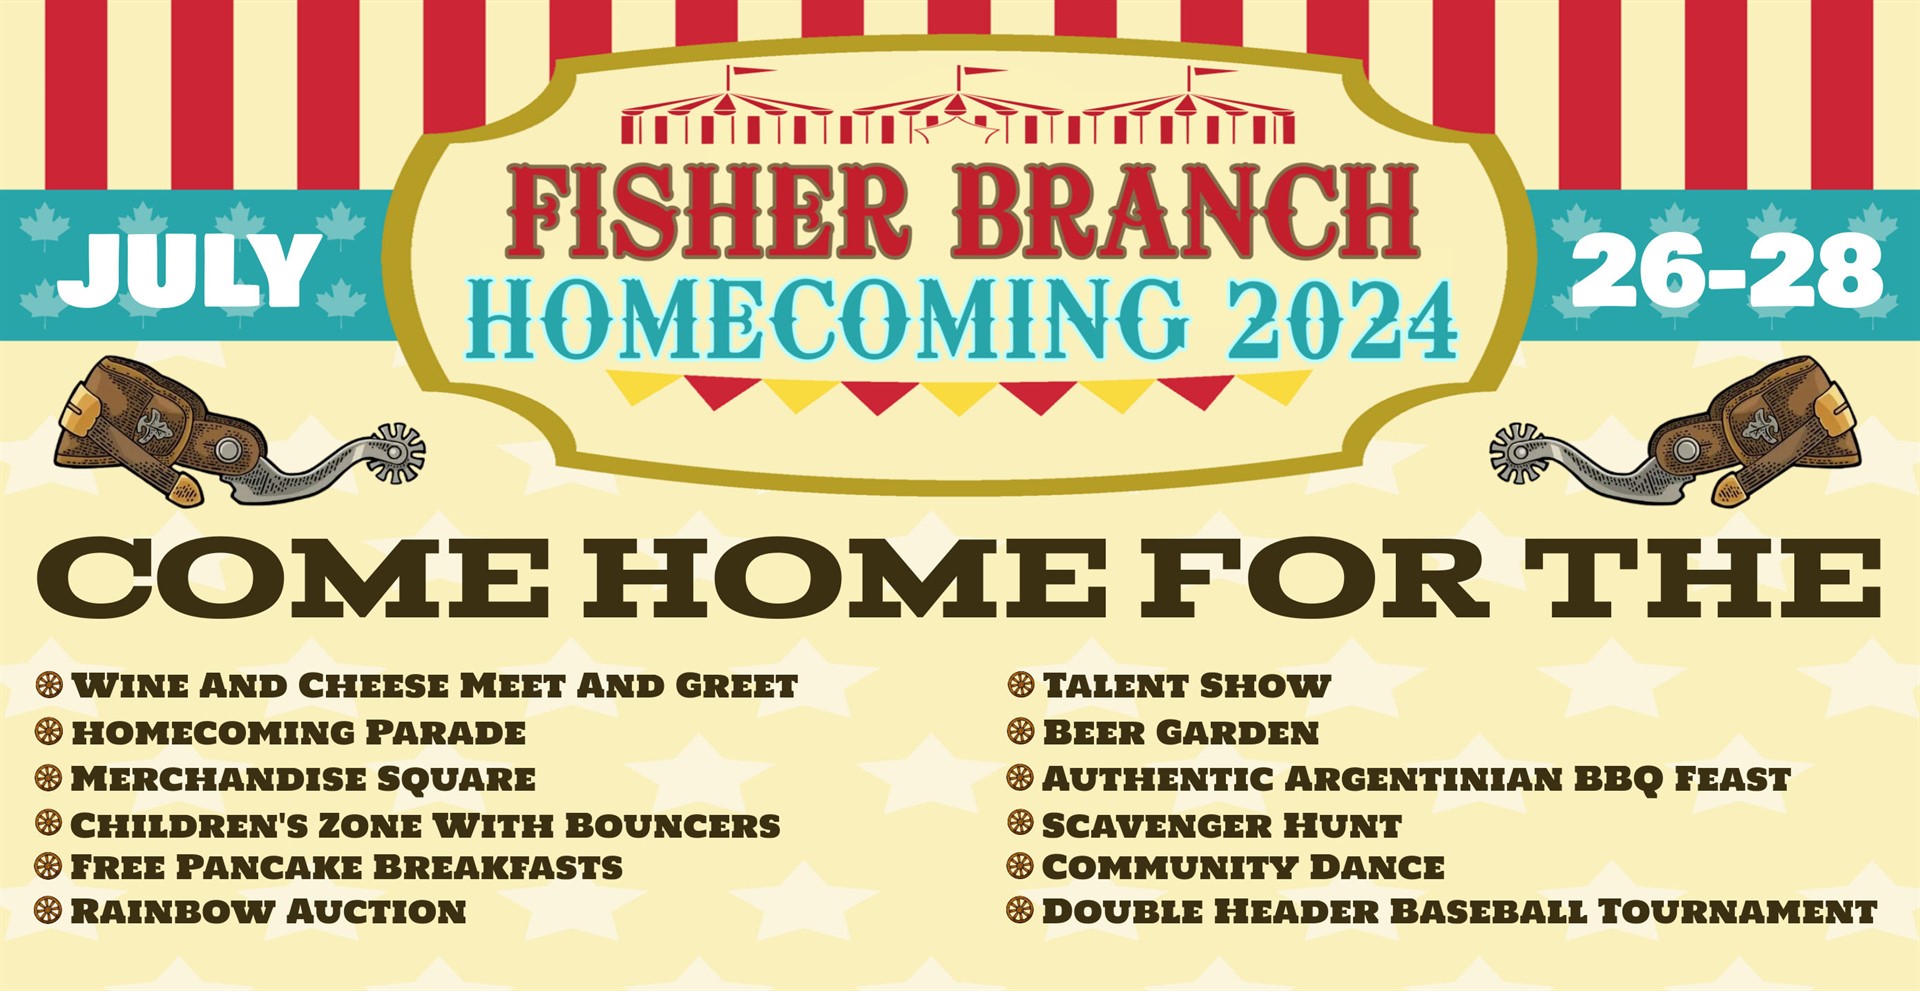 FISHER BRANCH HOMECOMING BANNER